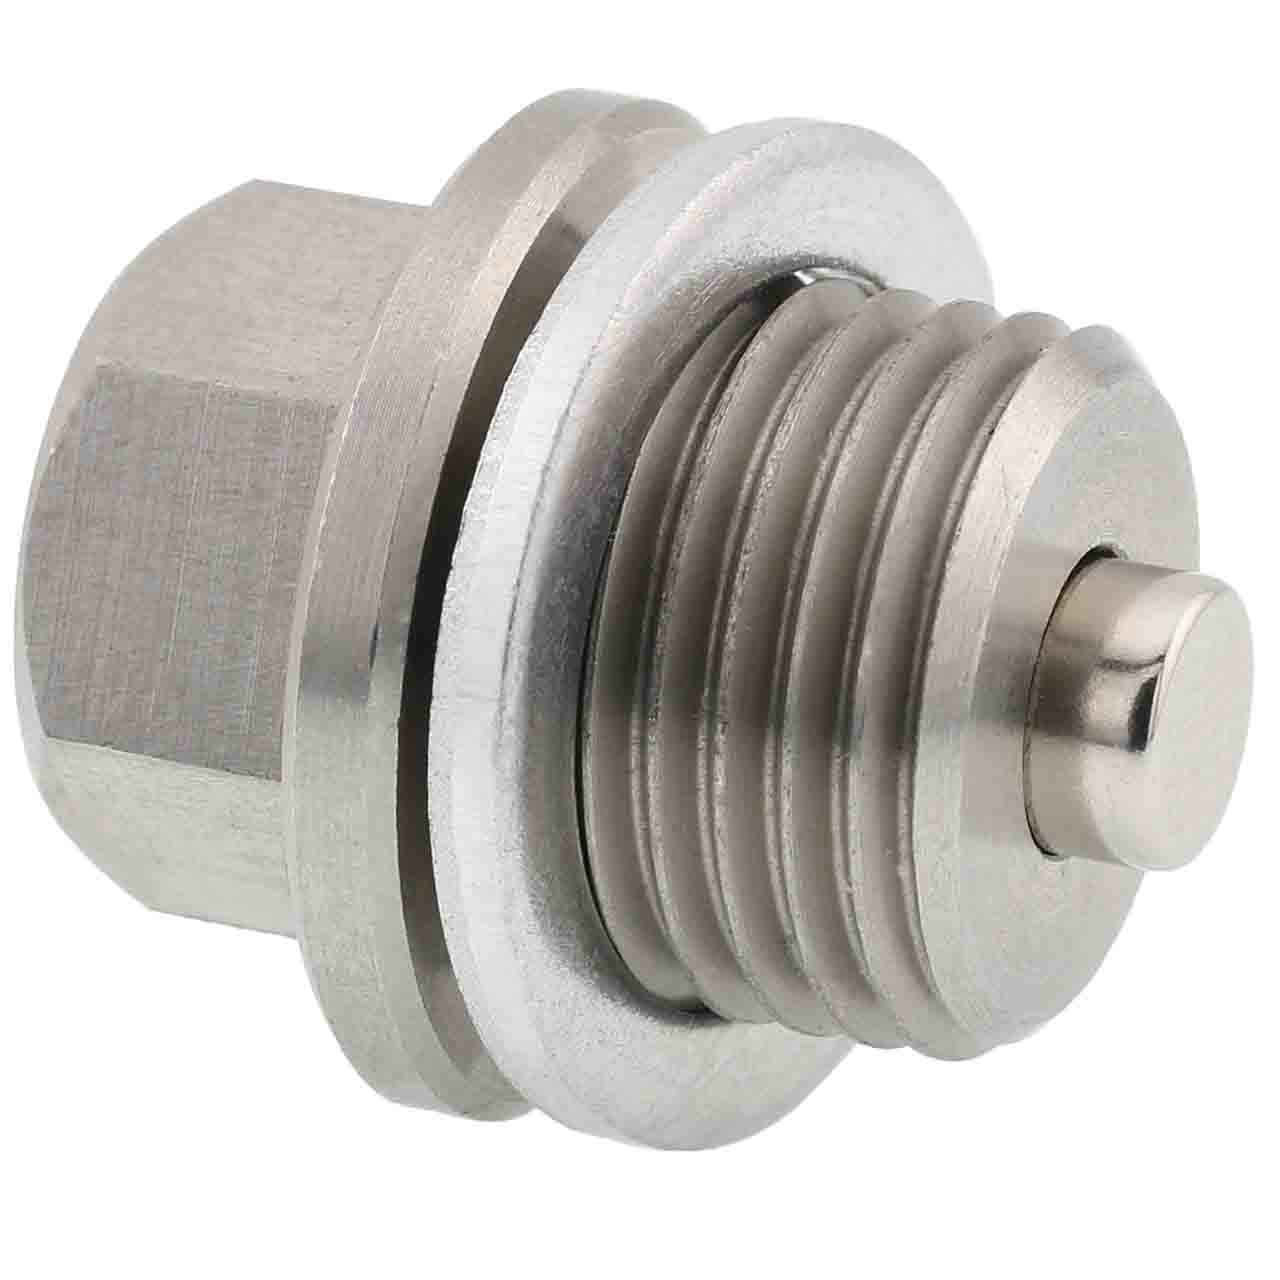 3070370 for Polaris - Stainless Steel Magnetic Oil Drain Plug with Neodymium Magnet - Made In USA